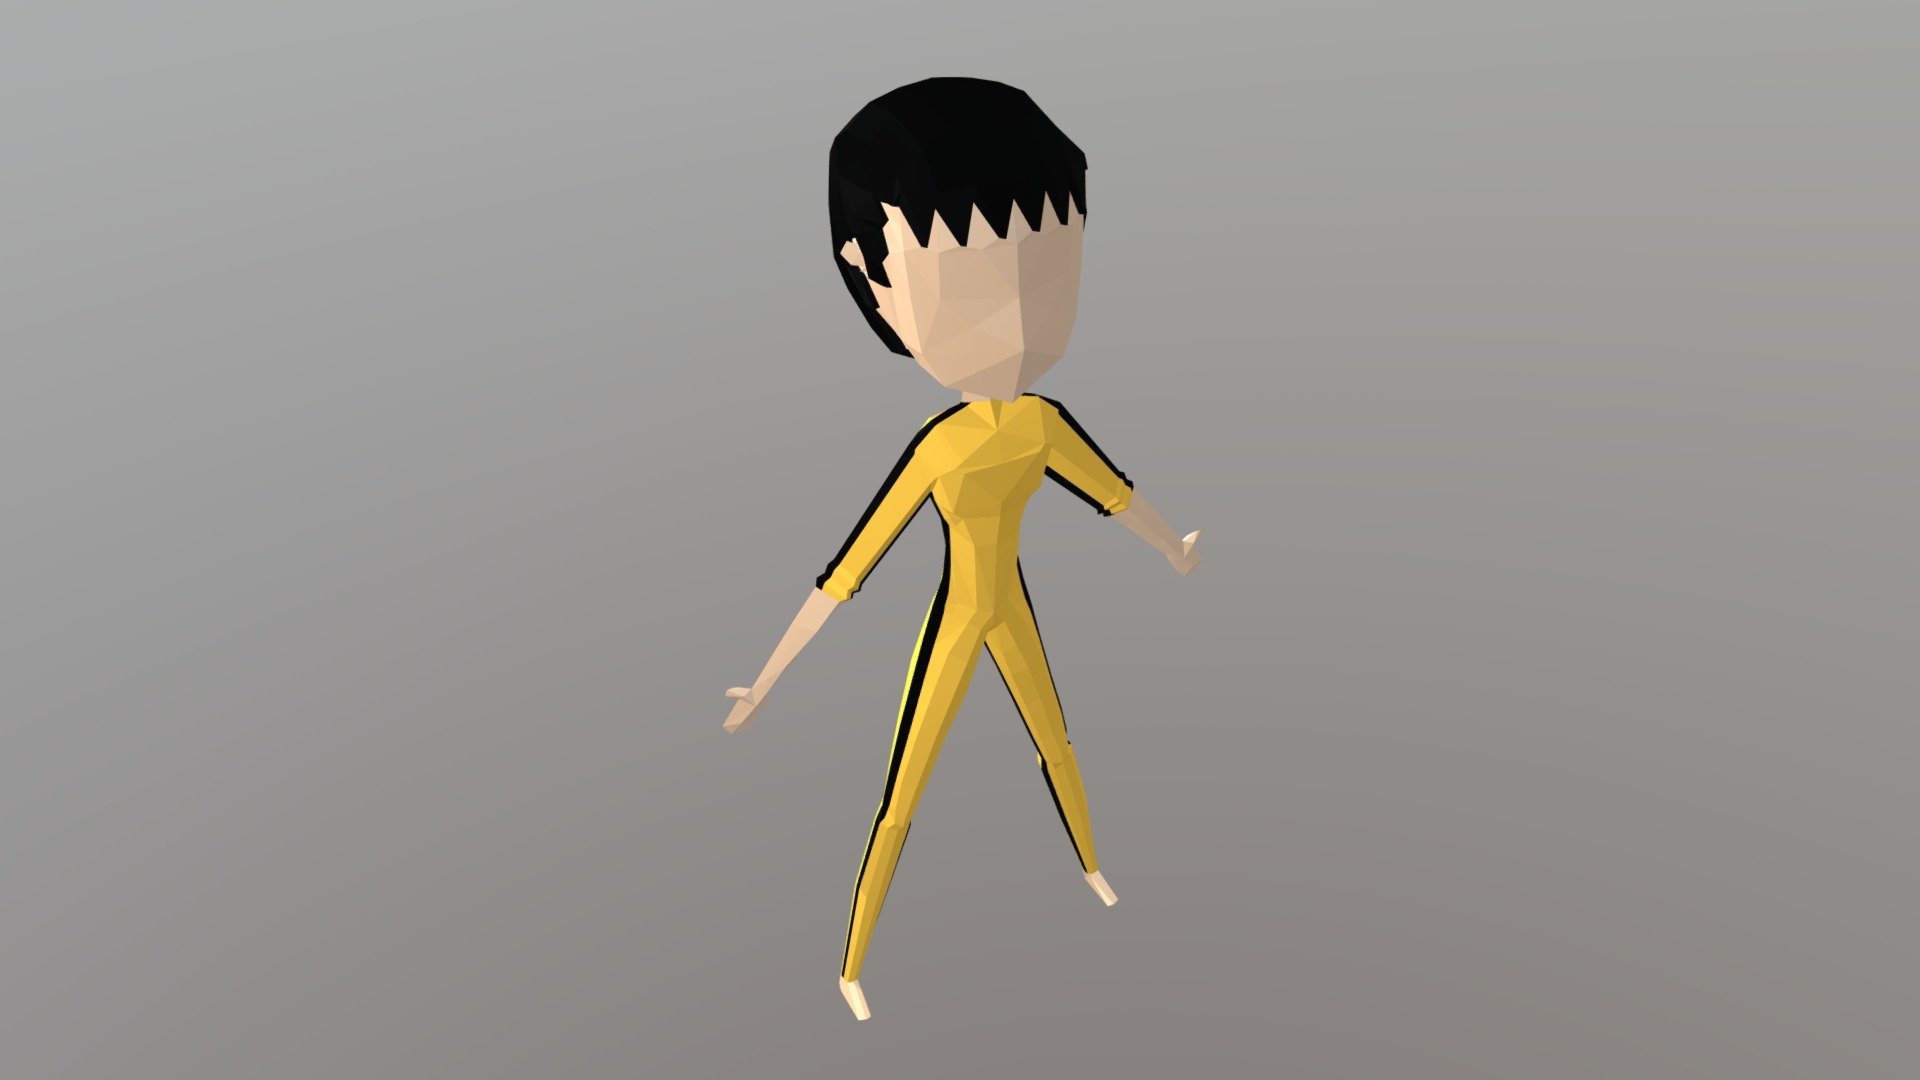 Bruce Lee low poly model